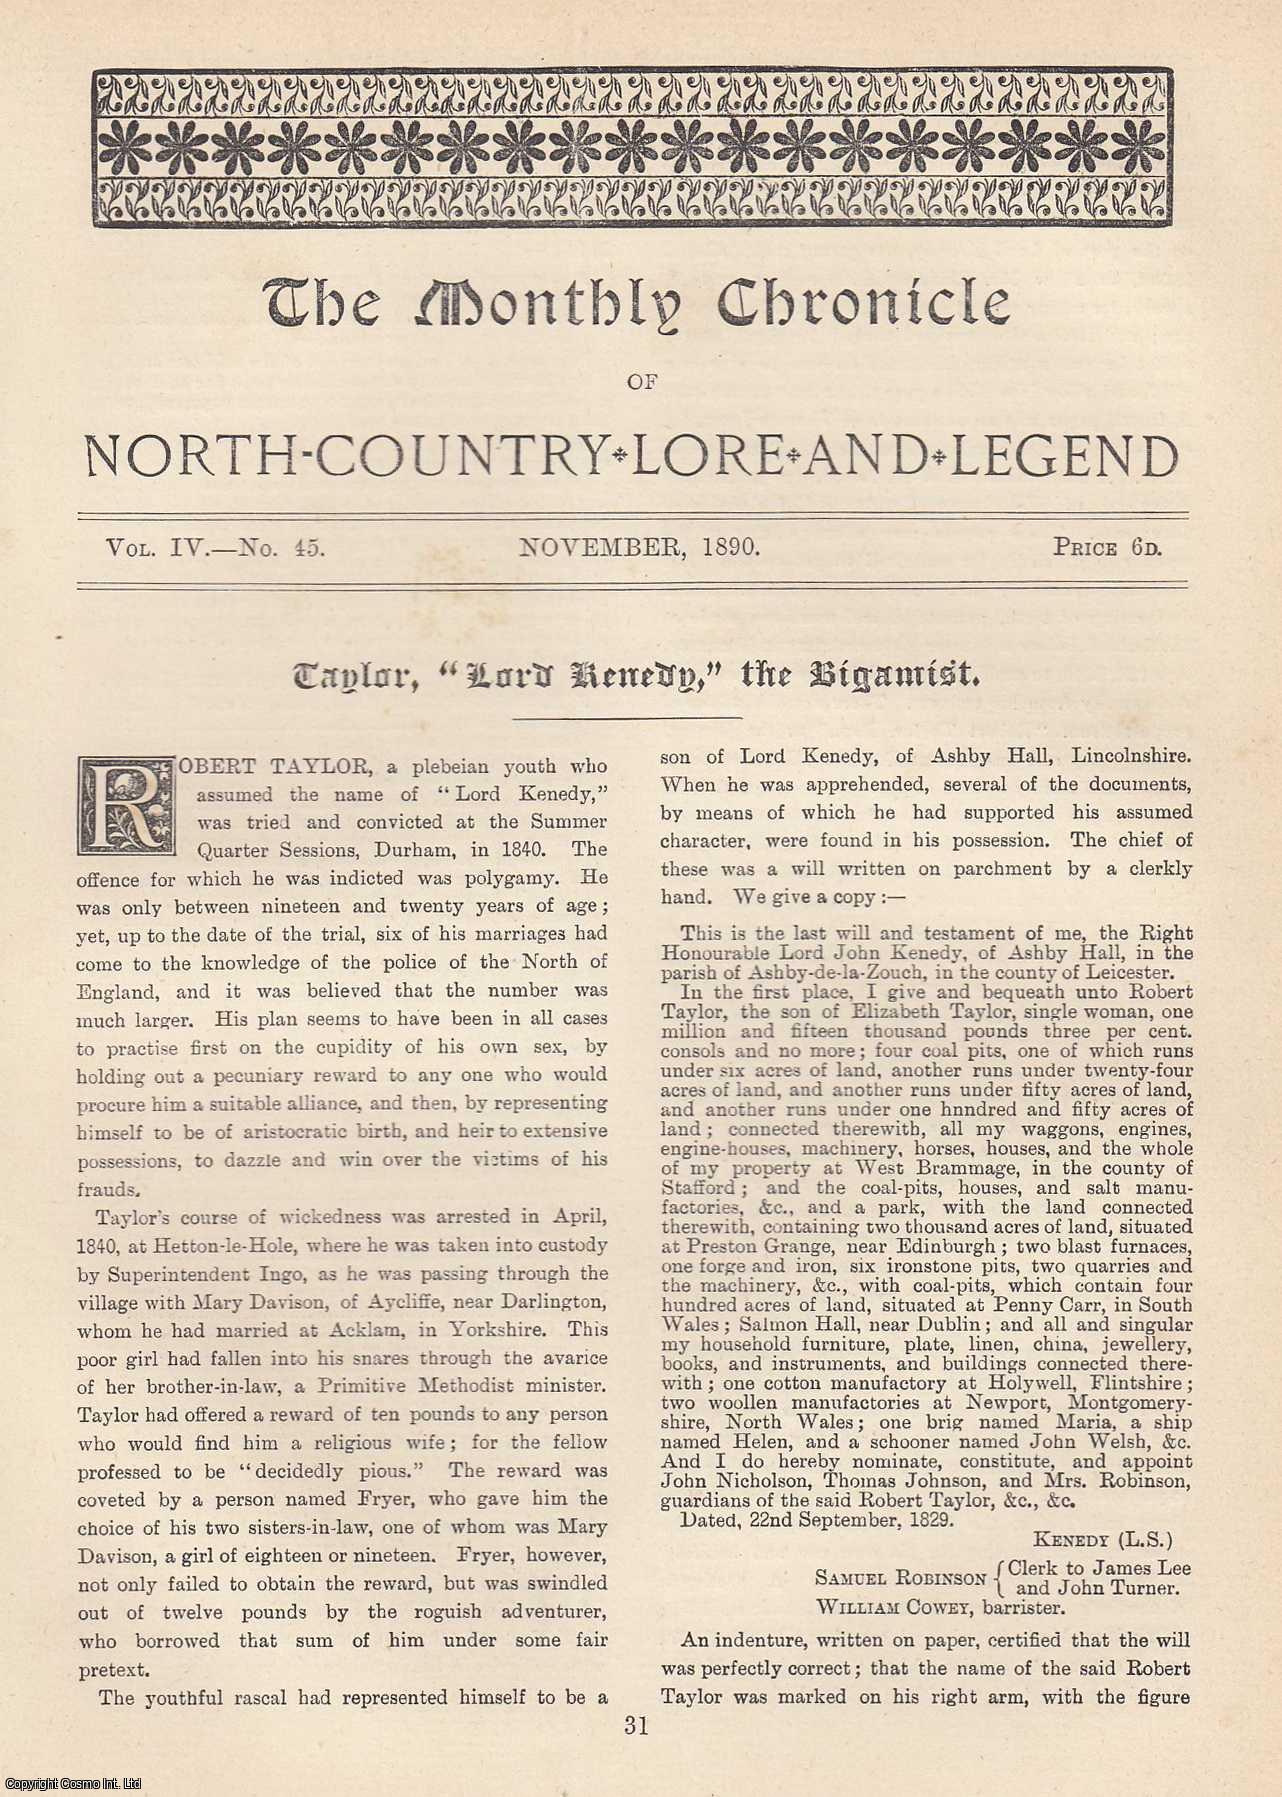 Editor, Walter Scott - Robert Taylor, Lord Kenedy, the Bigamist. An original article from The Monthly Chronicle 1890.